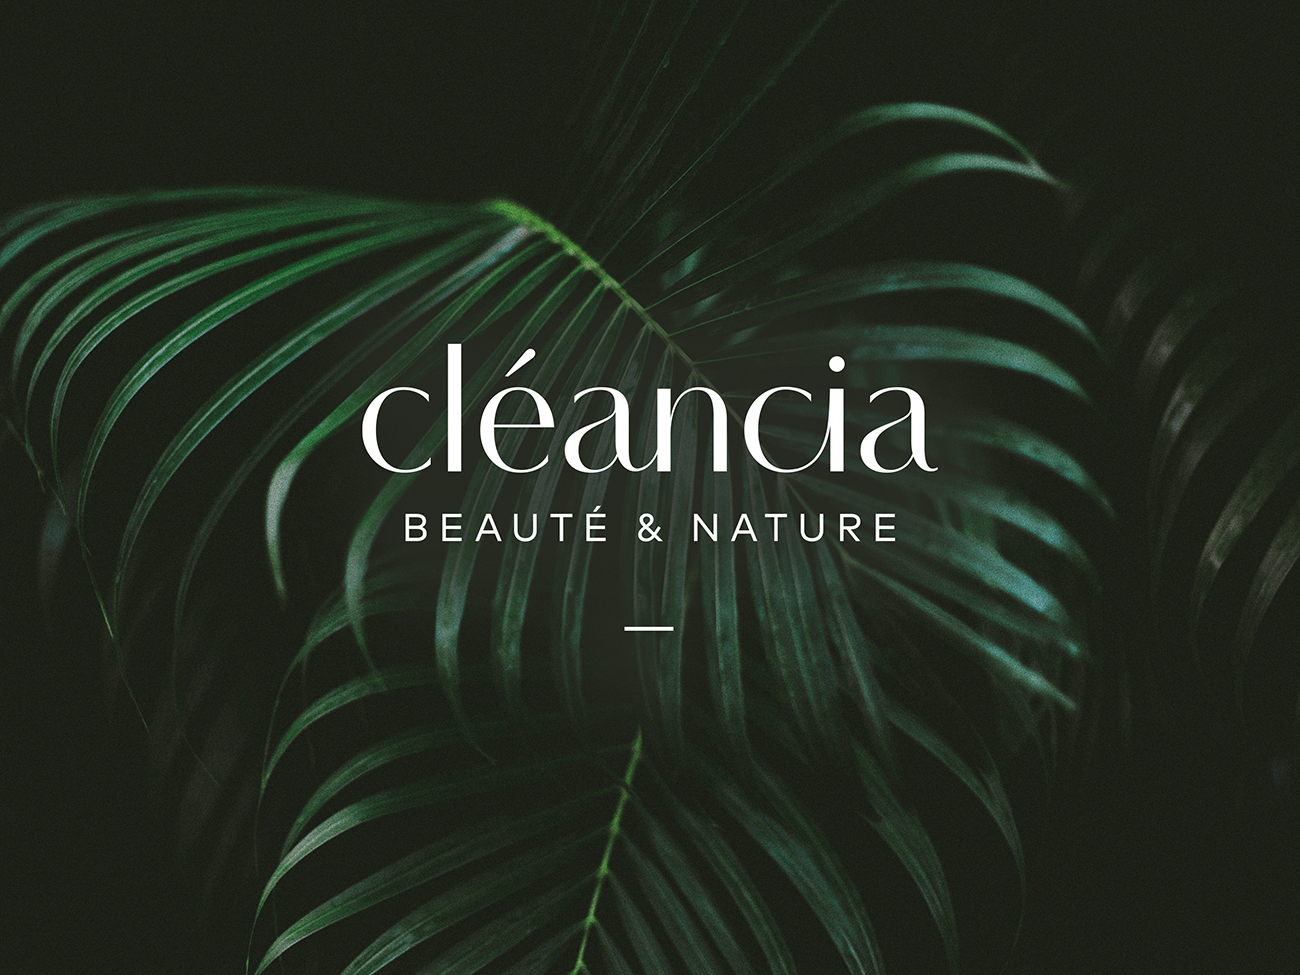 cleancia_branding_by-catherine-bisaillon_1300x975_001